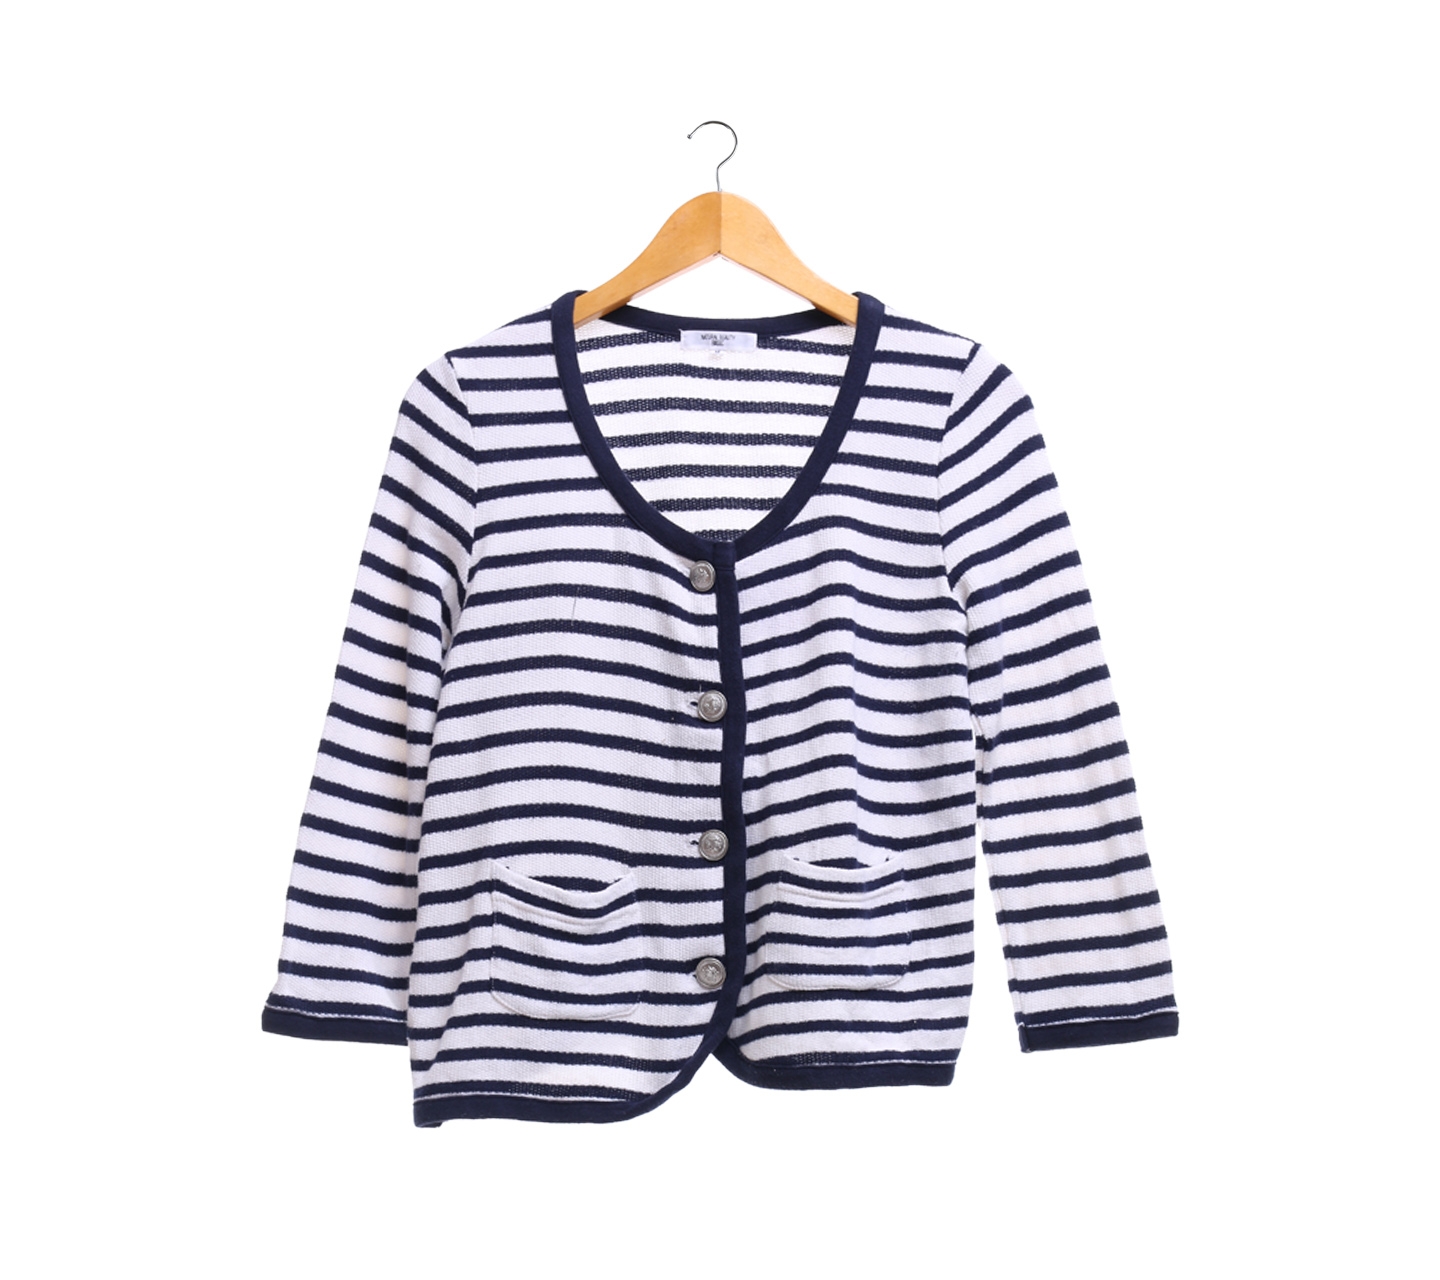 Natural Beauty Basic White And Dark Blue Striped Cardigan